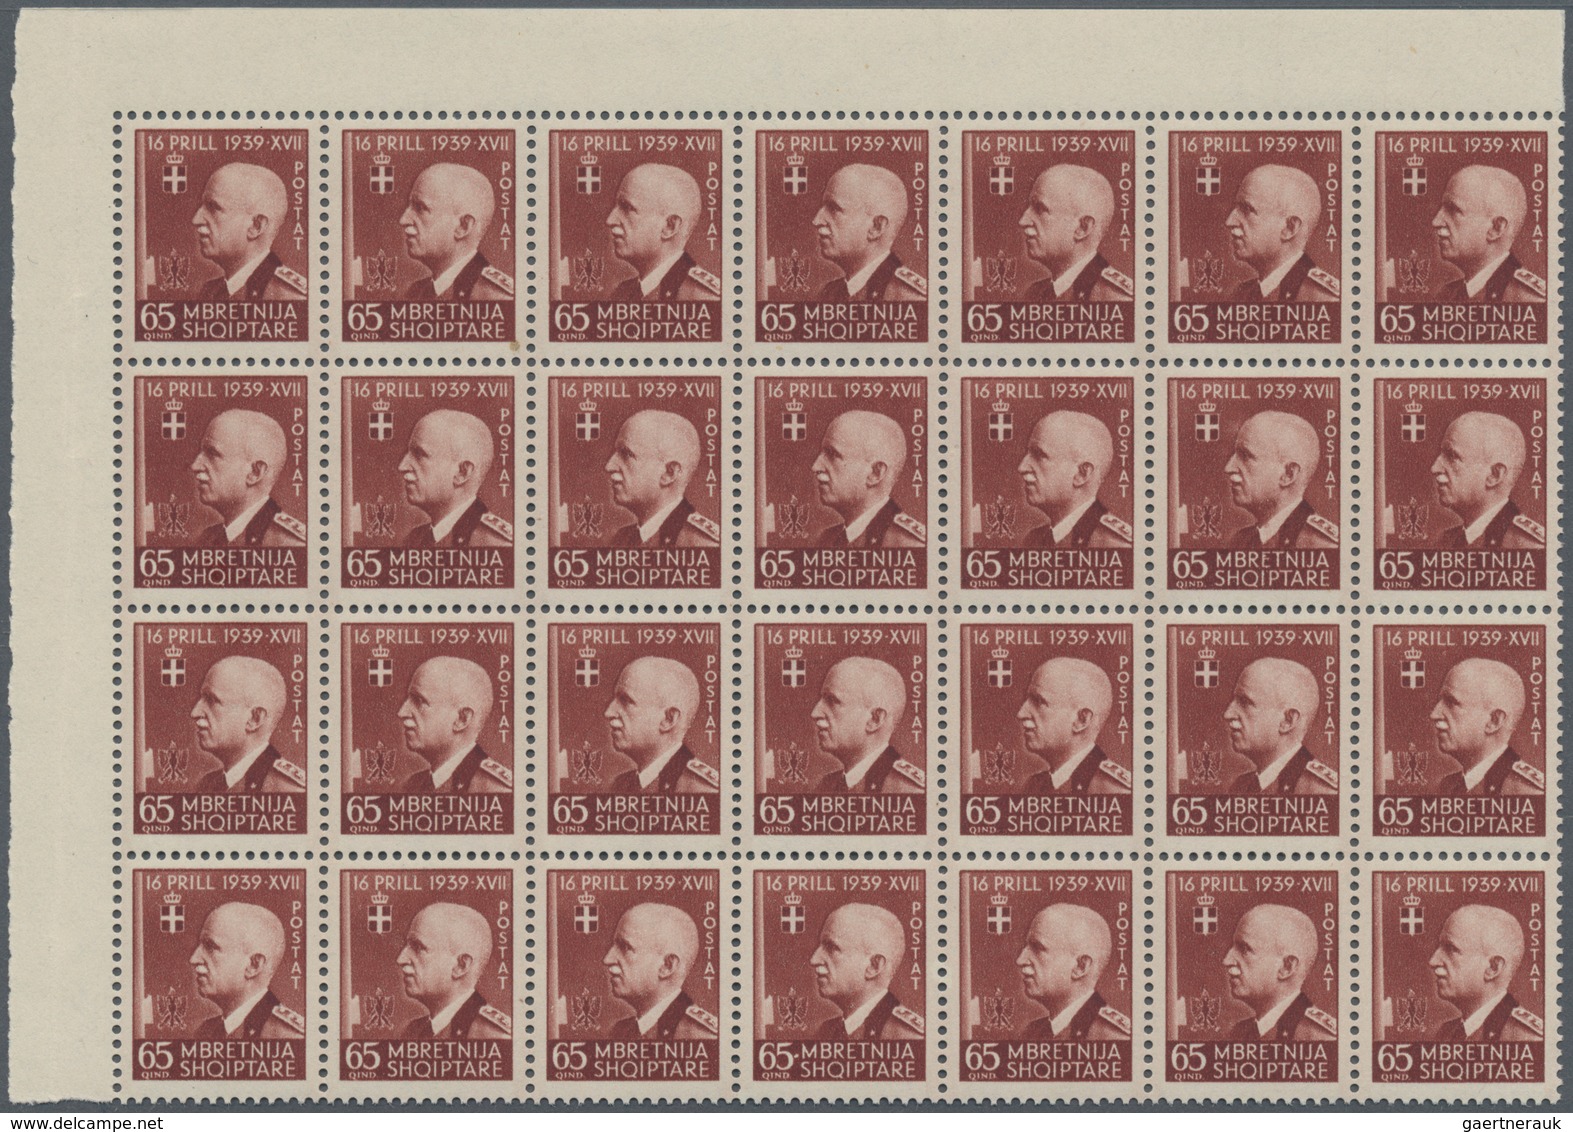 Albanien: 1942, King Victor Emanuel III. 65q. Dark Red-brown In A Lot With About 230 Stamps Mostly I - Albania